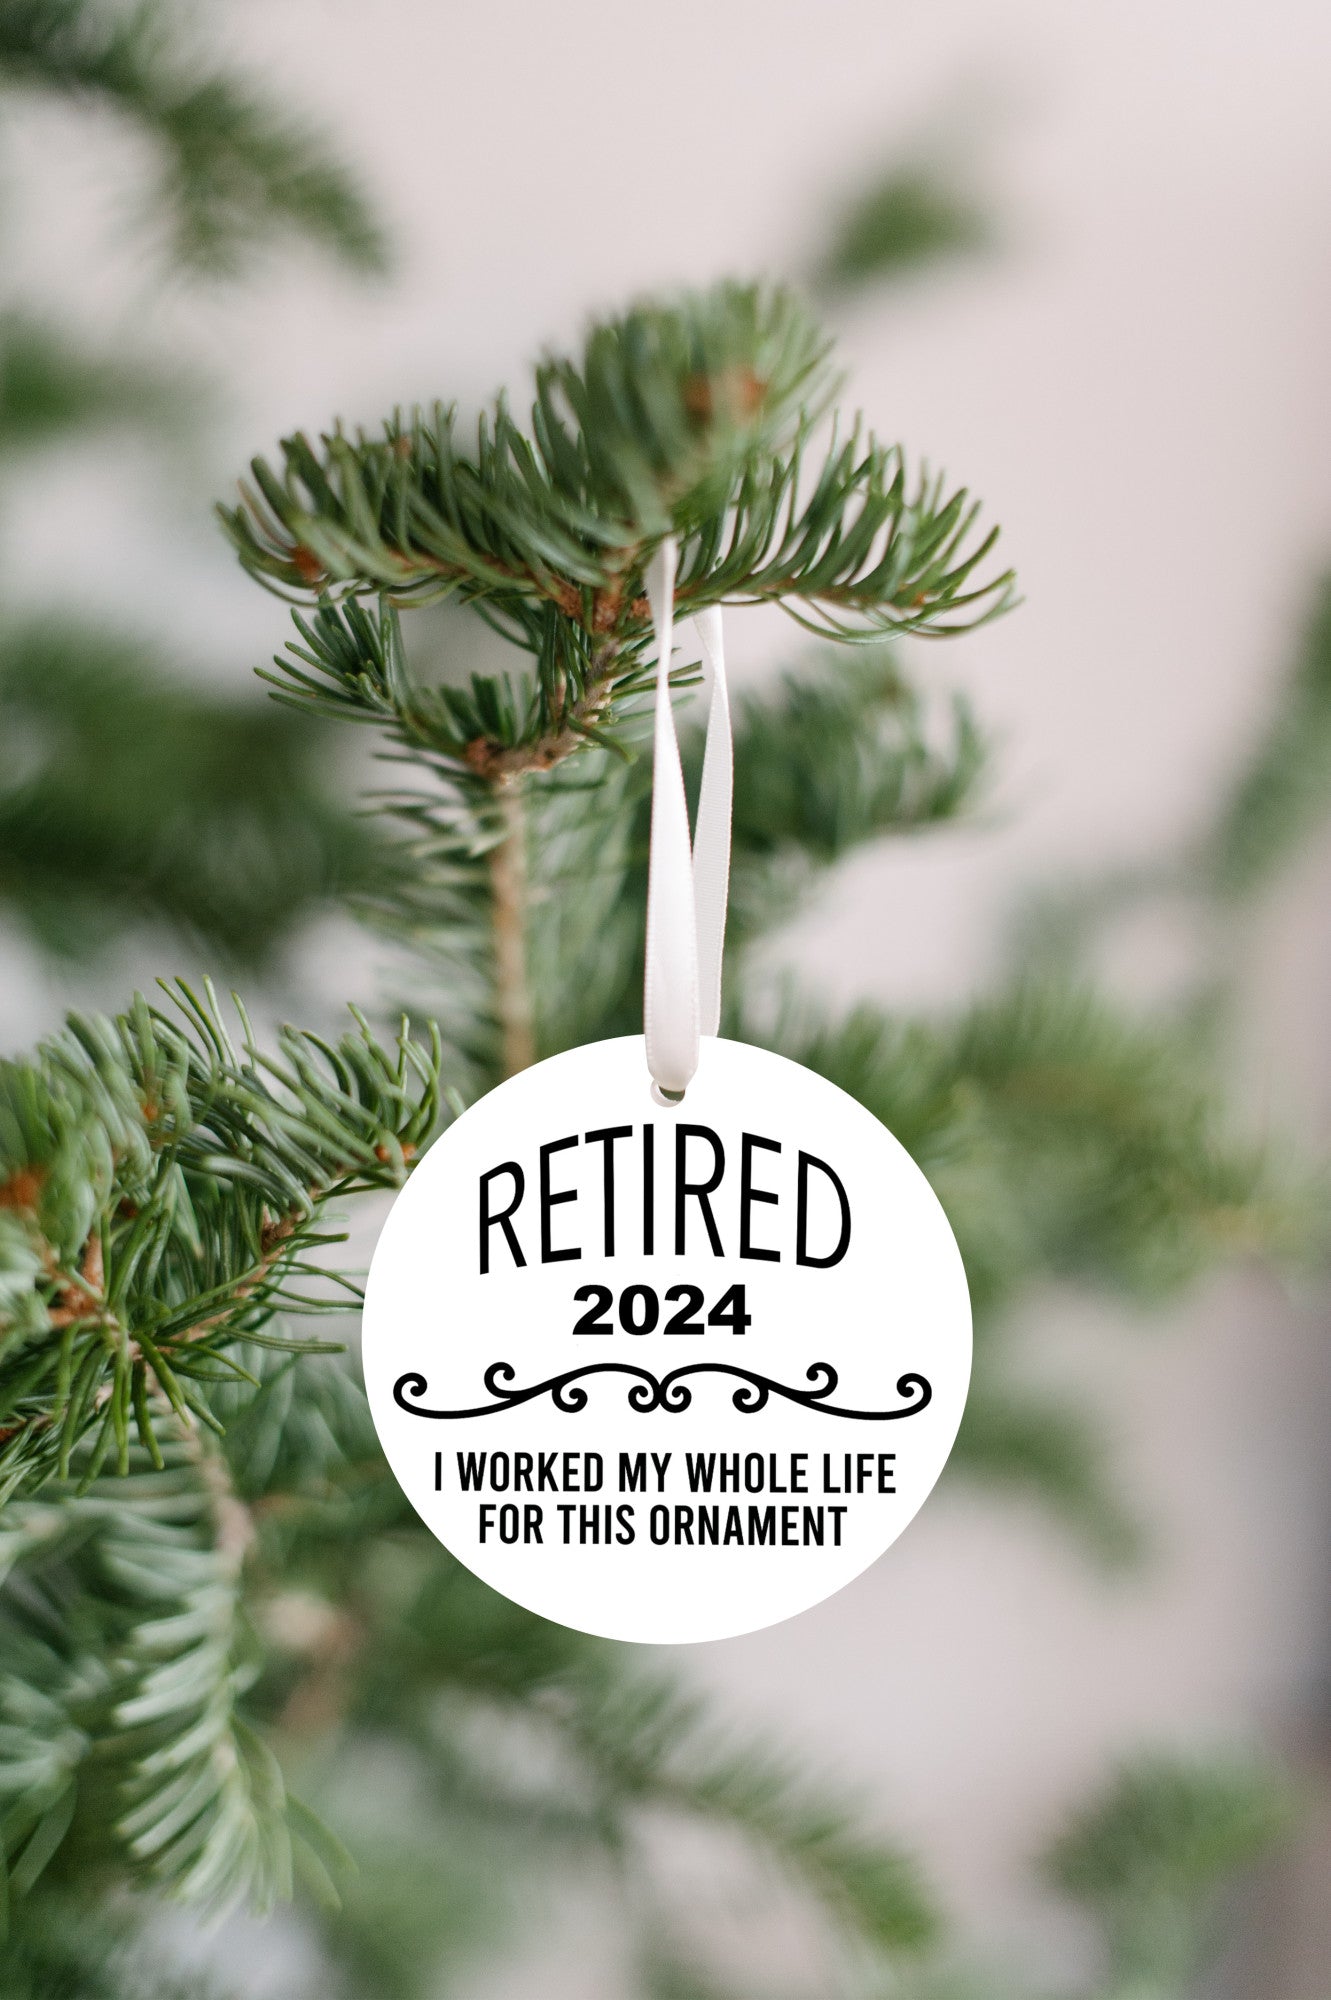 Retired 2024 I worked my whole life for this ornament